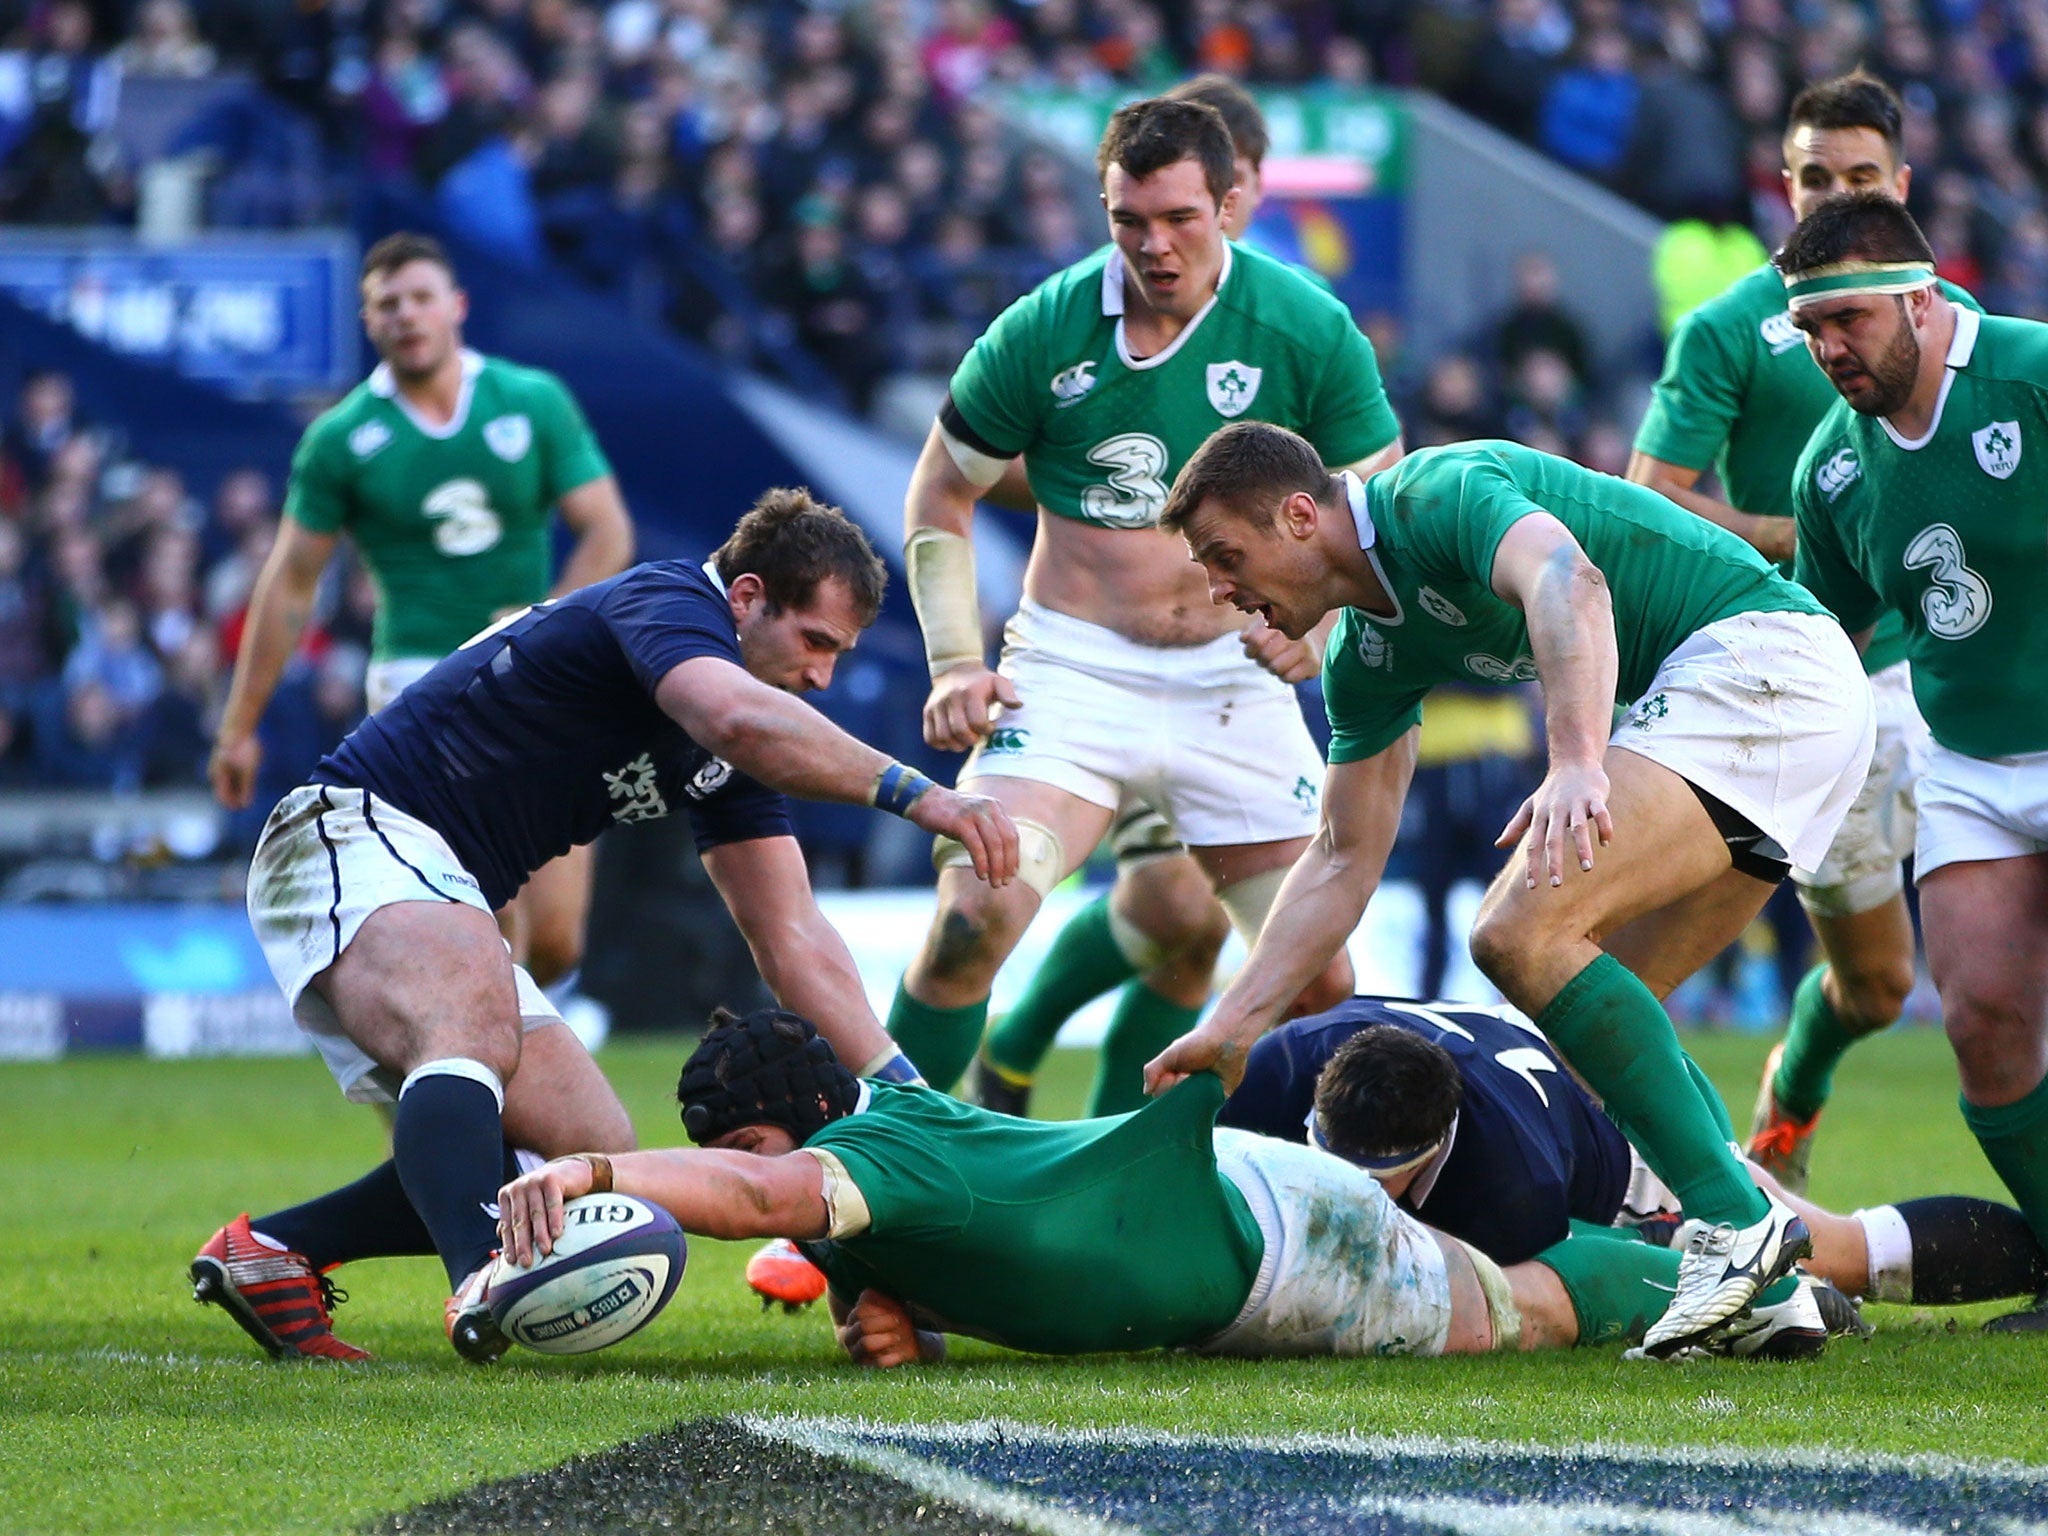 Sean O'Brien touches down for his second try of the match